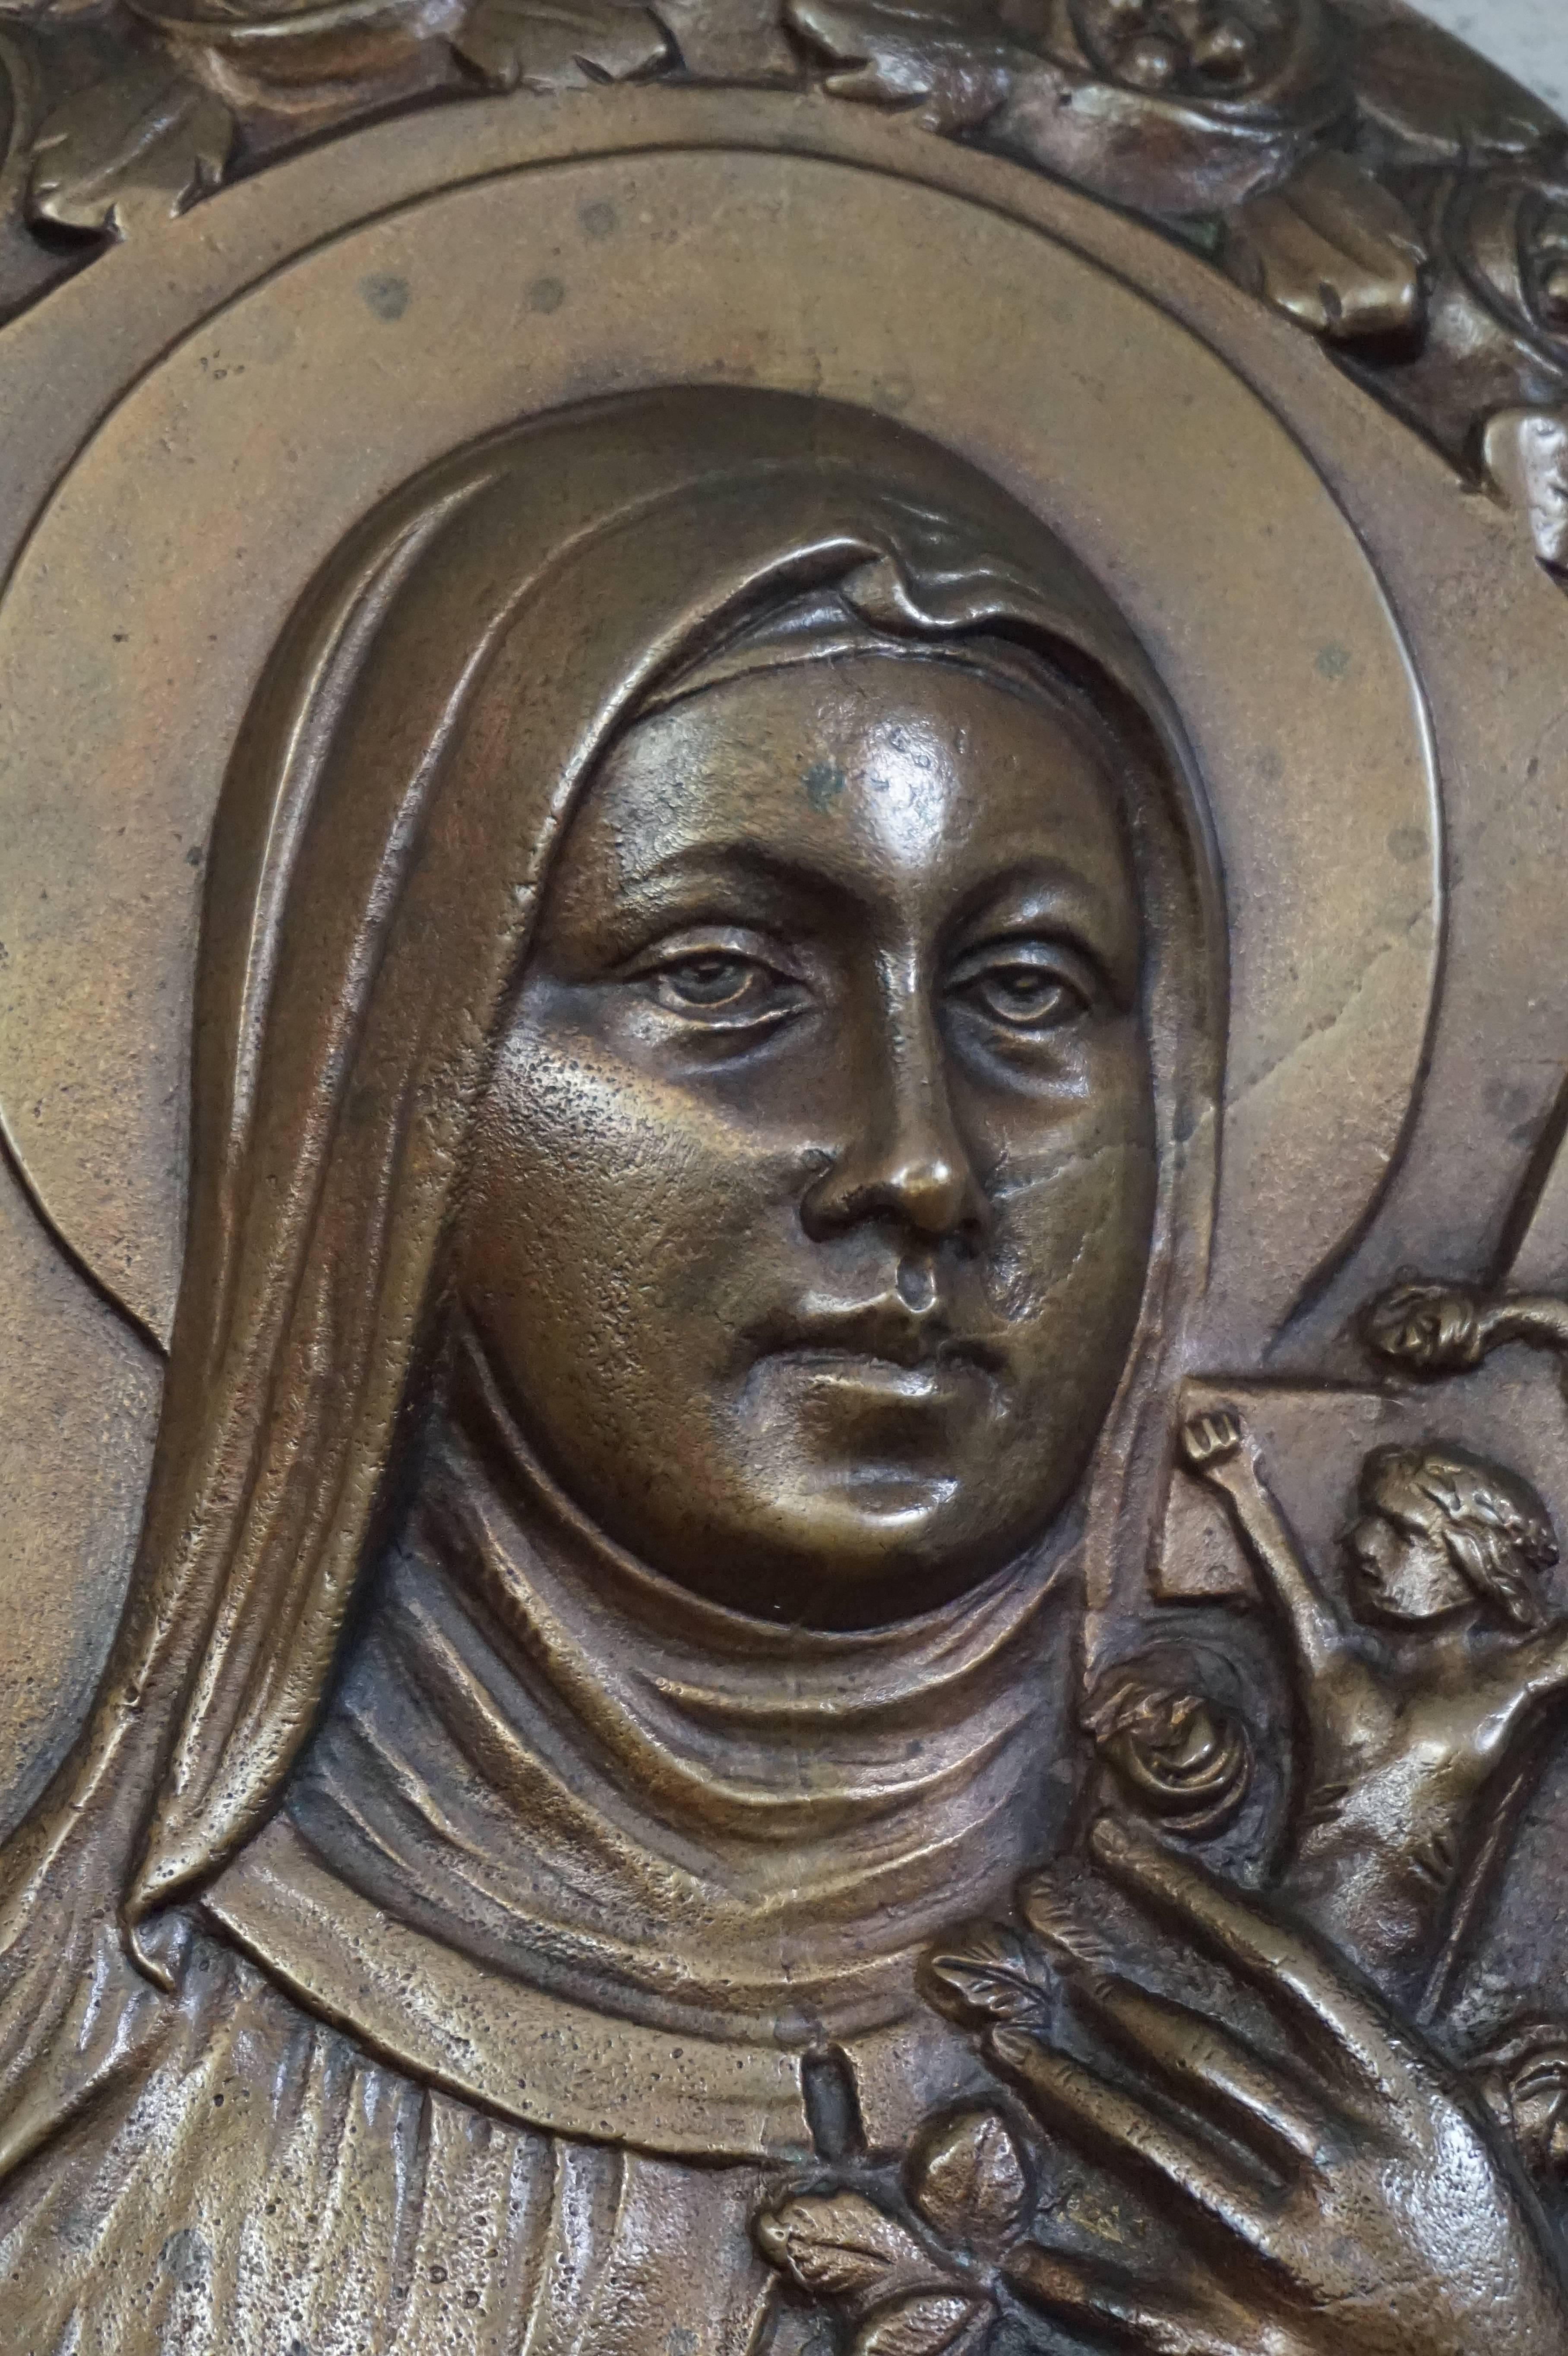 Religious Art Deco wall plaque of a very popular saint.

Saint Thérèse of Lisieux (1873-1897) is the patron saint of France and she is also known as Saint Thérèse of the Child Jesus and the Holy Face. She is popularly known as 'The Little Flower